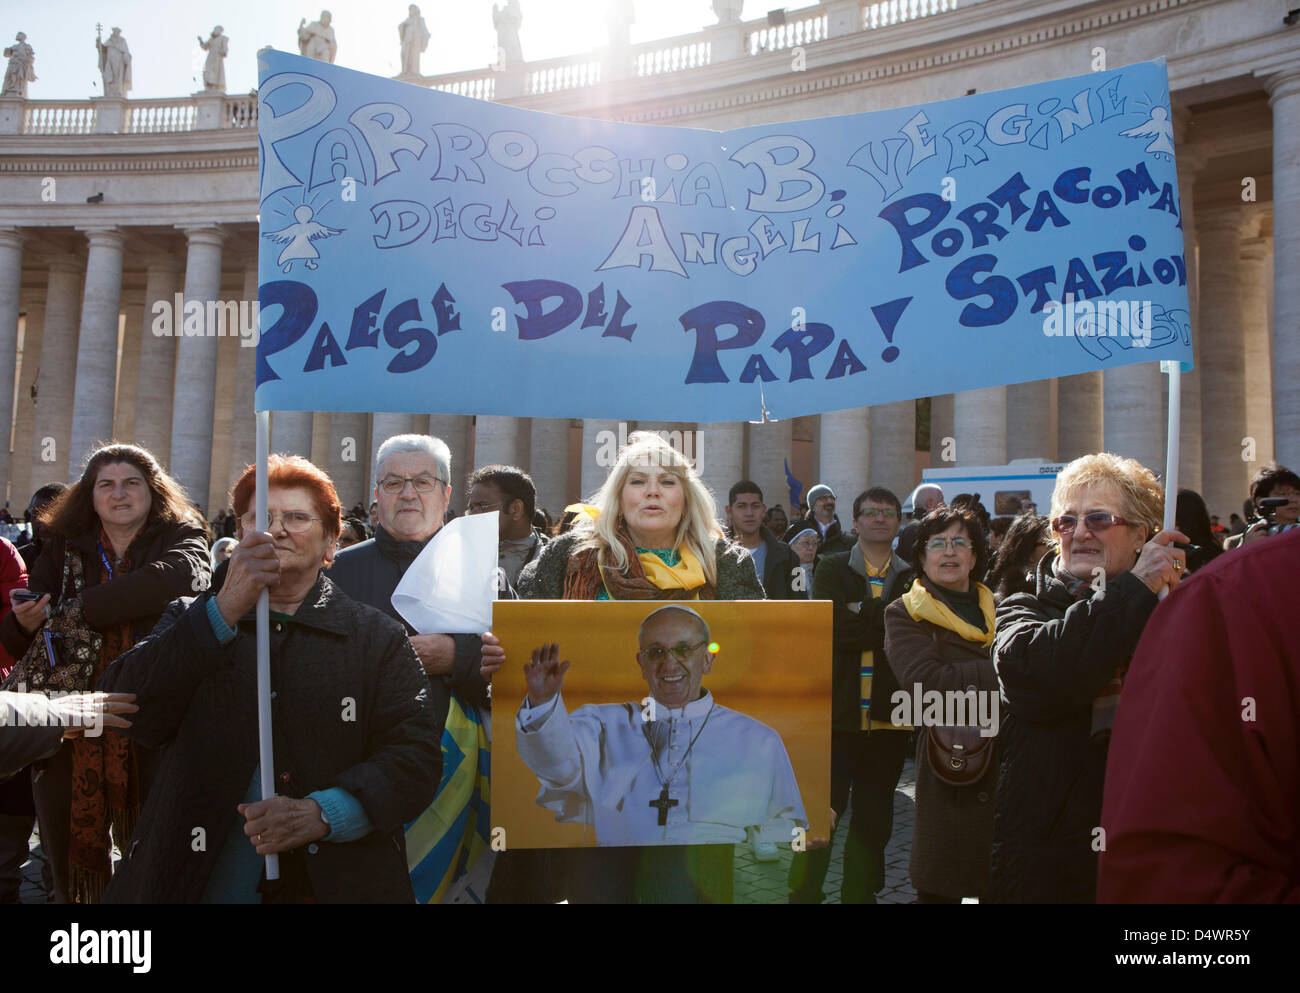 Vatican, Italy. 19th March 2013. Pope Francis I inauguration Mass  Roma, Italy. 19 Mar 2013  Credit:  Stephen Bisgrove / Alamy Live News Stock Photo